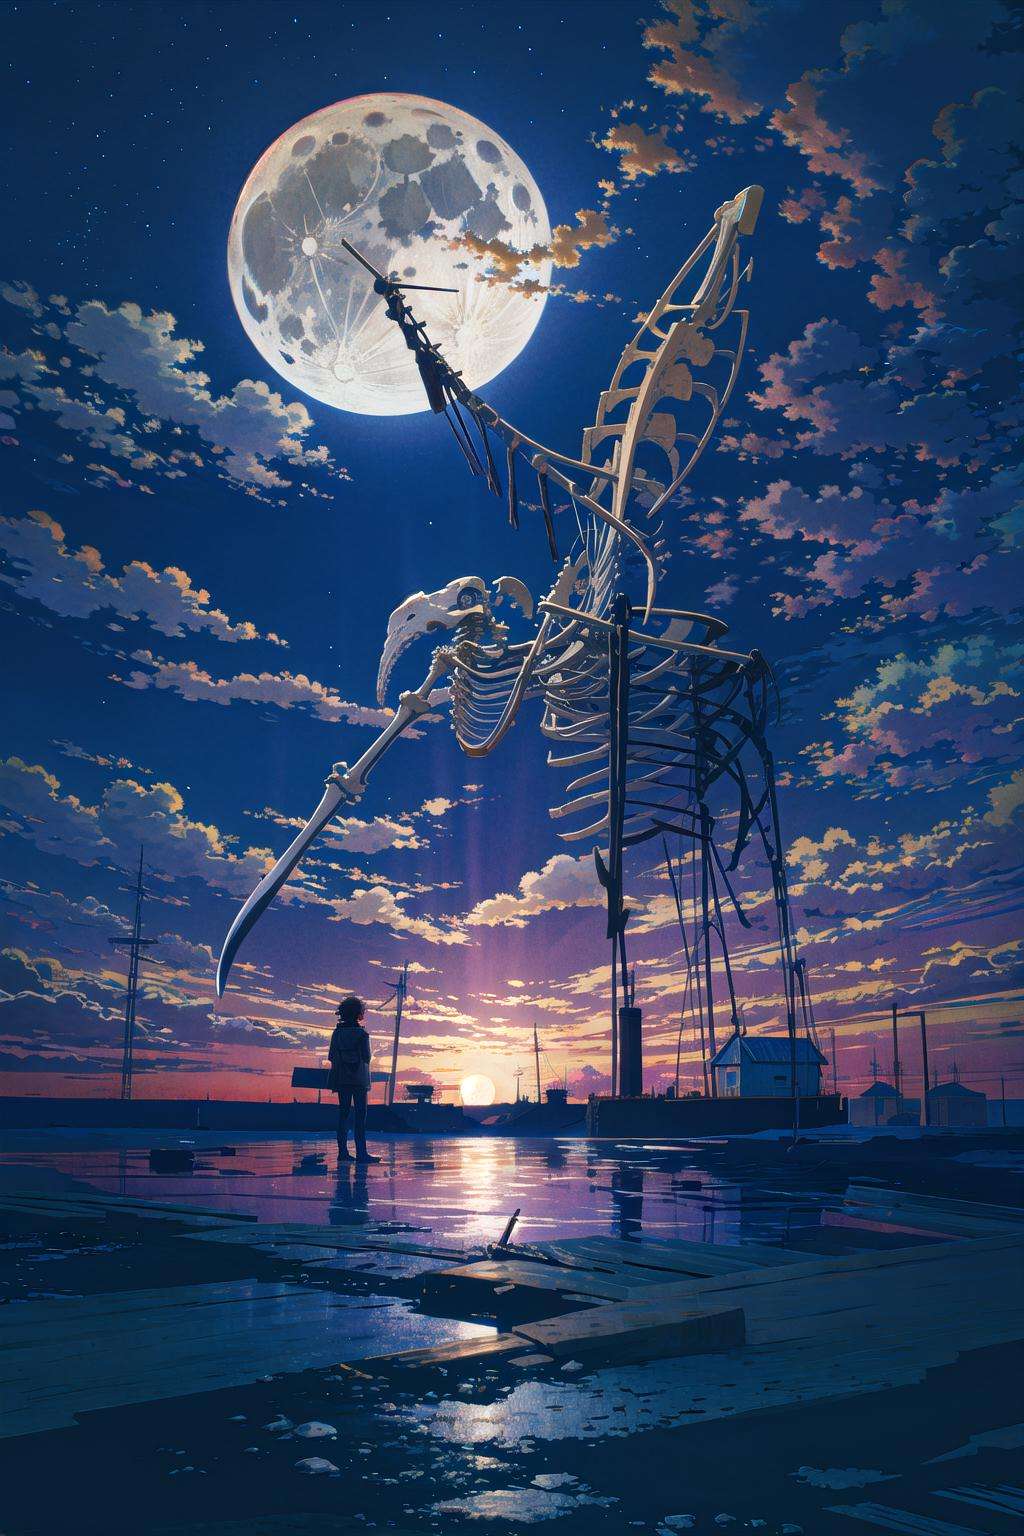 octans, no humans, moon, sky, night, full moon, cloud, whale, outdoors, scenery, night sky, water, watercraft, cloudy sky, building, skeleton, animal.<lora:octans-PYNOISE-LOHA:1>